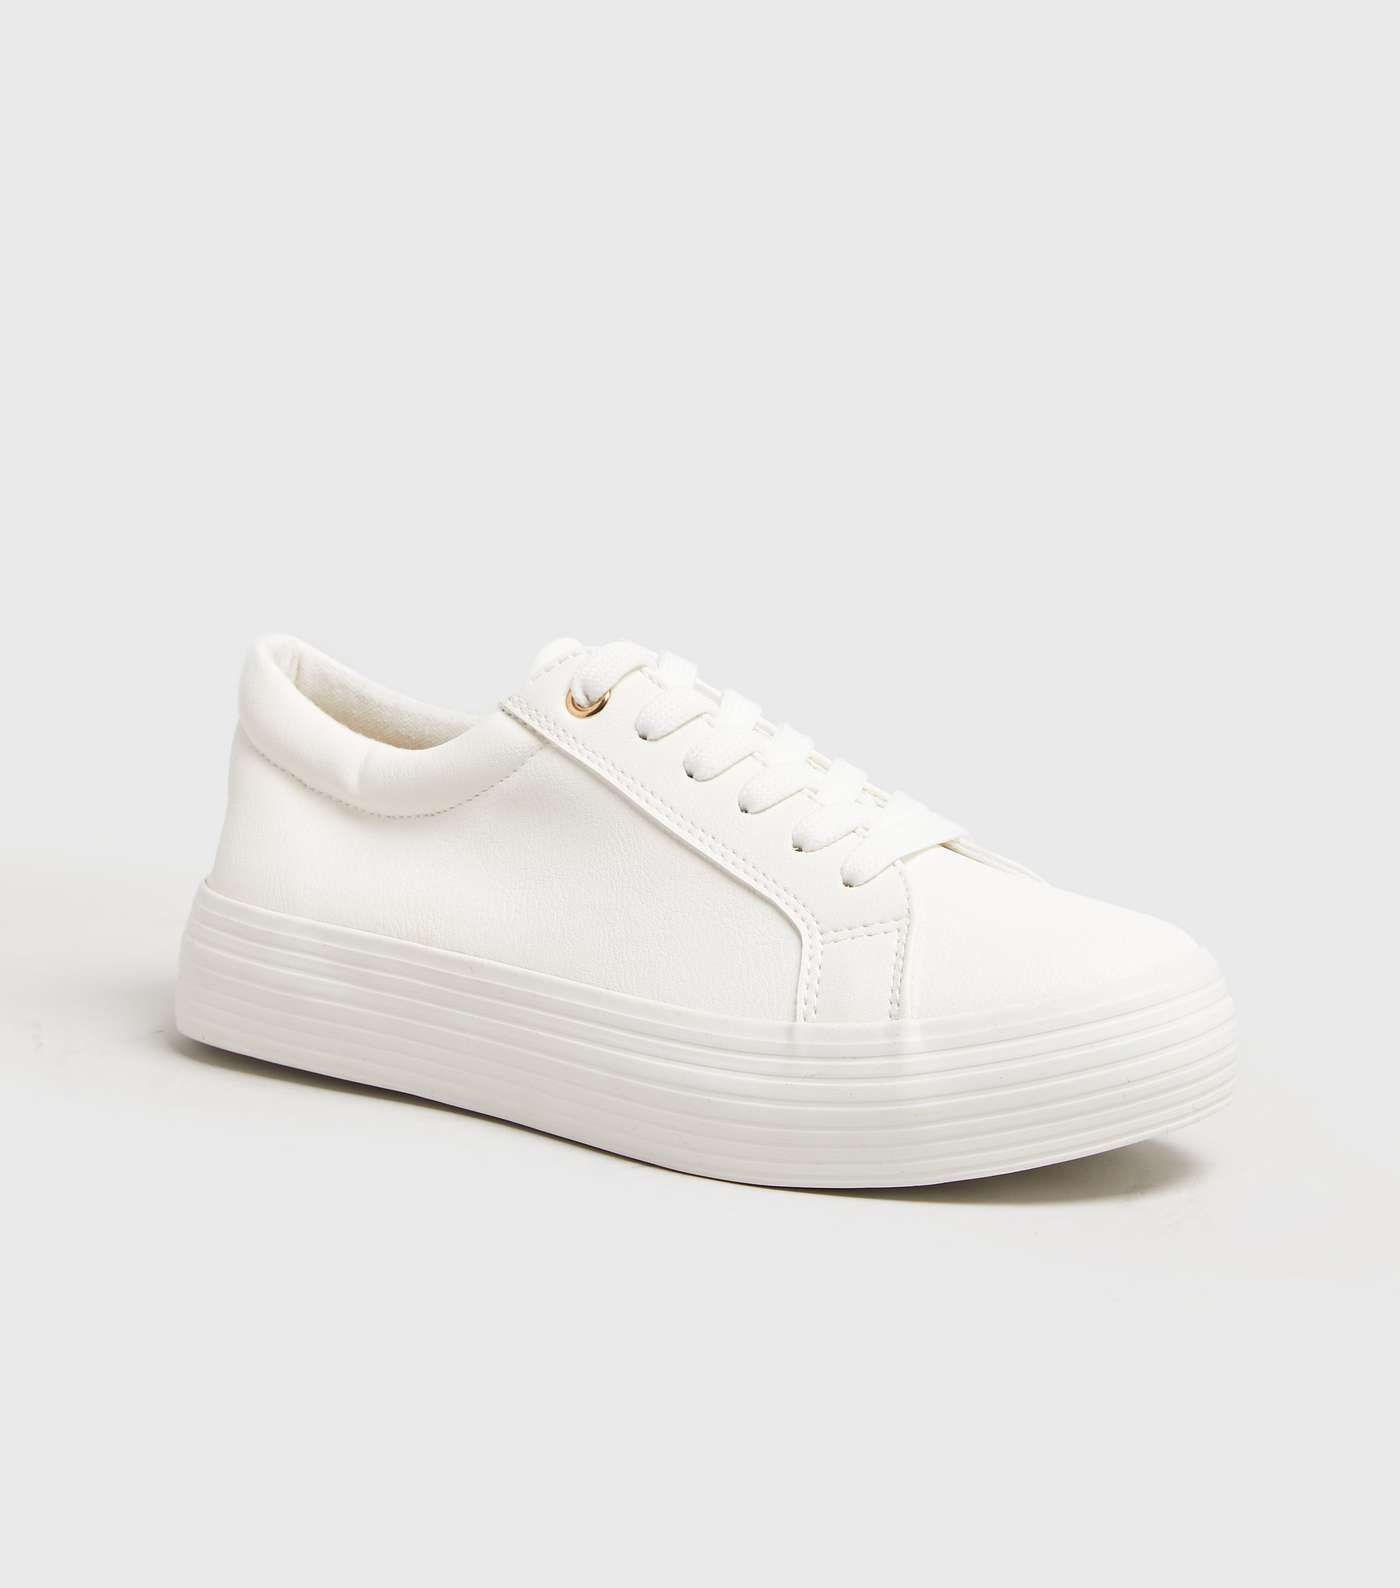 Girls White Leather-Look Flatform Trainers